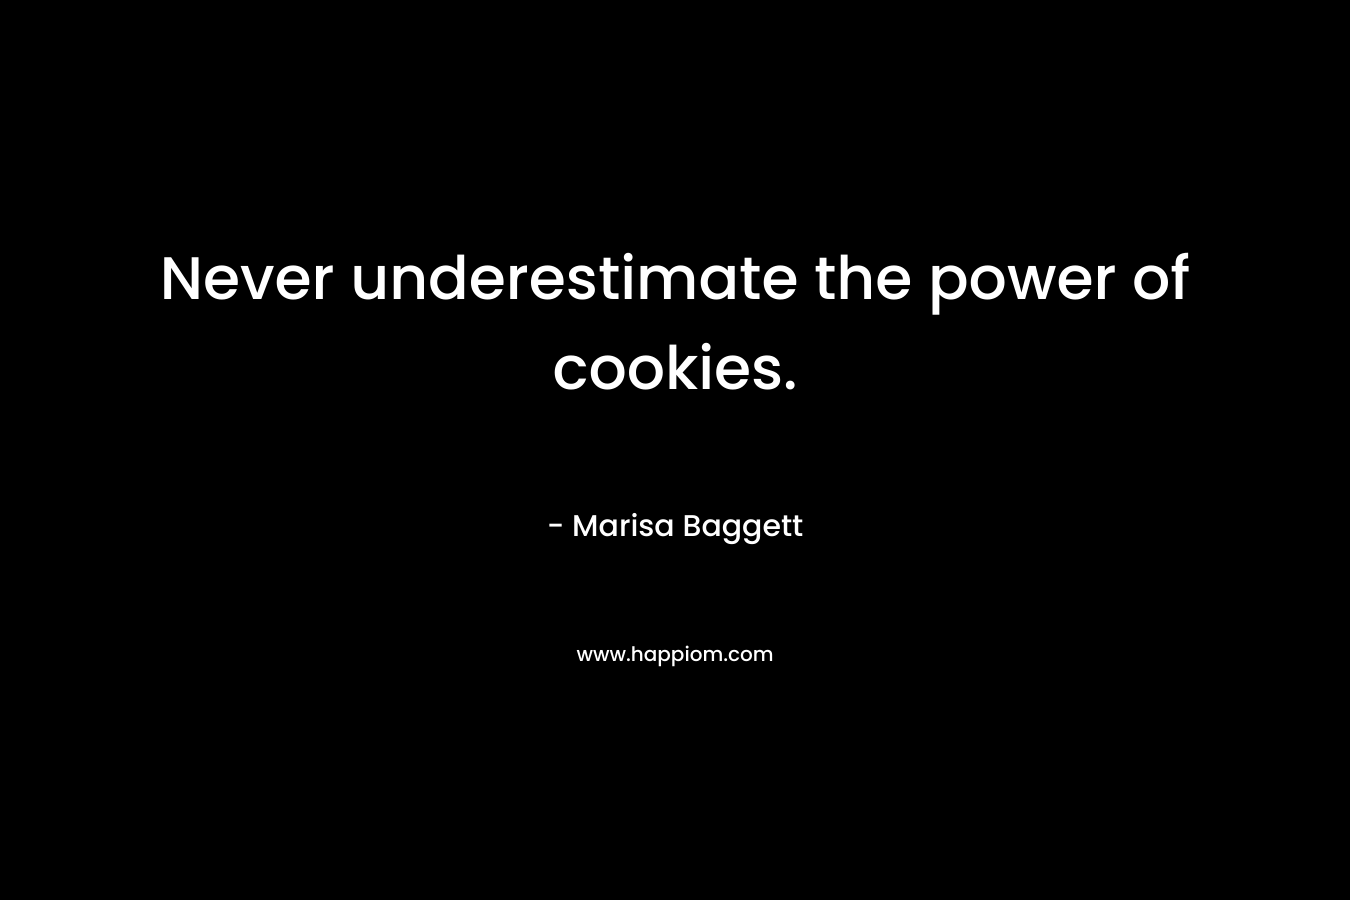 Never underestimate the power of cookies.